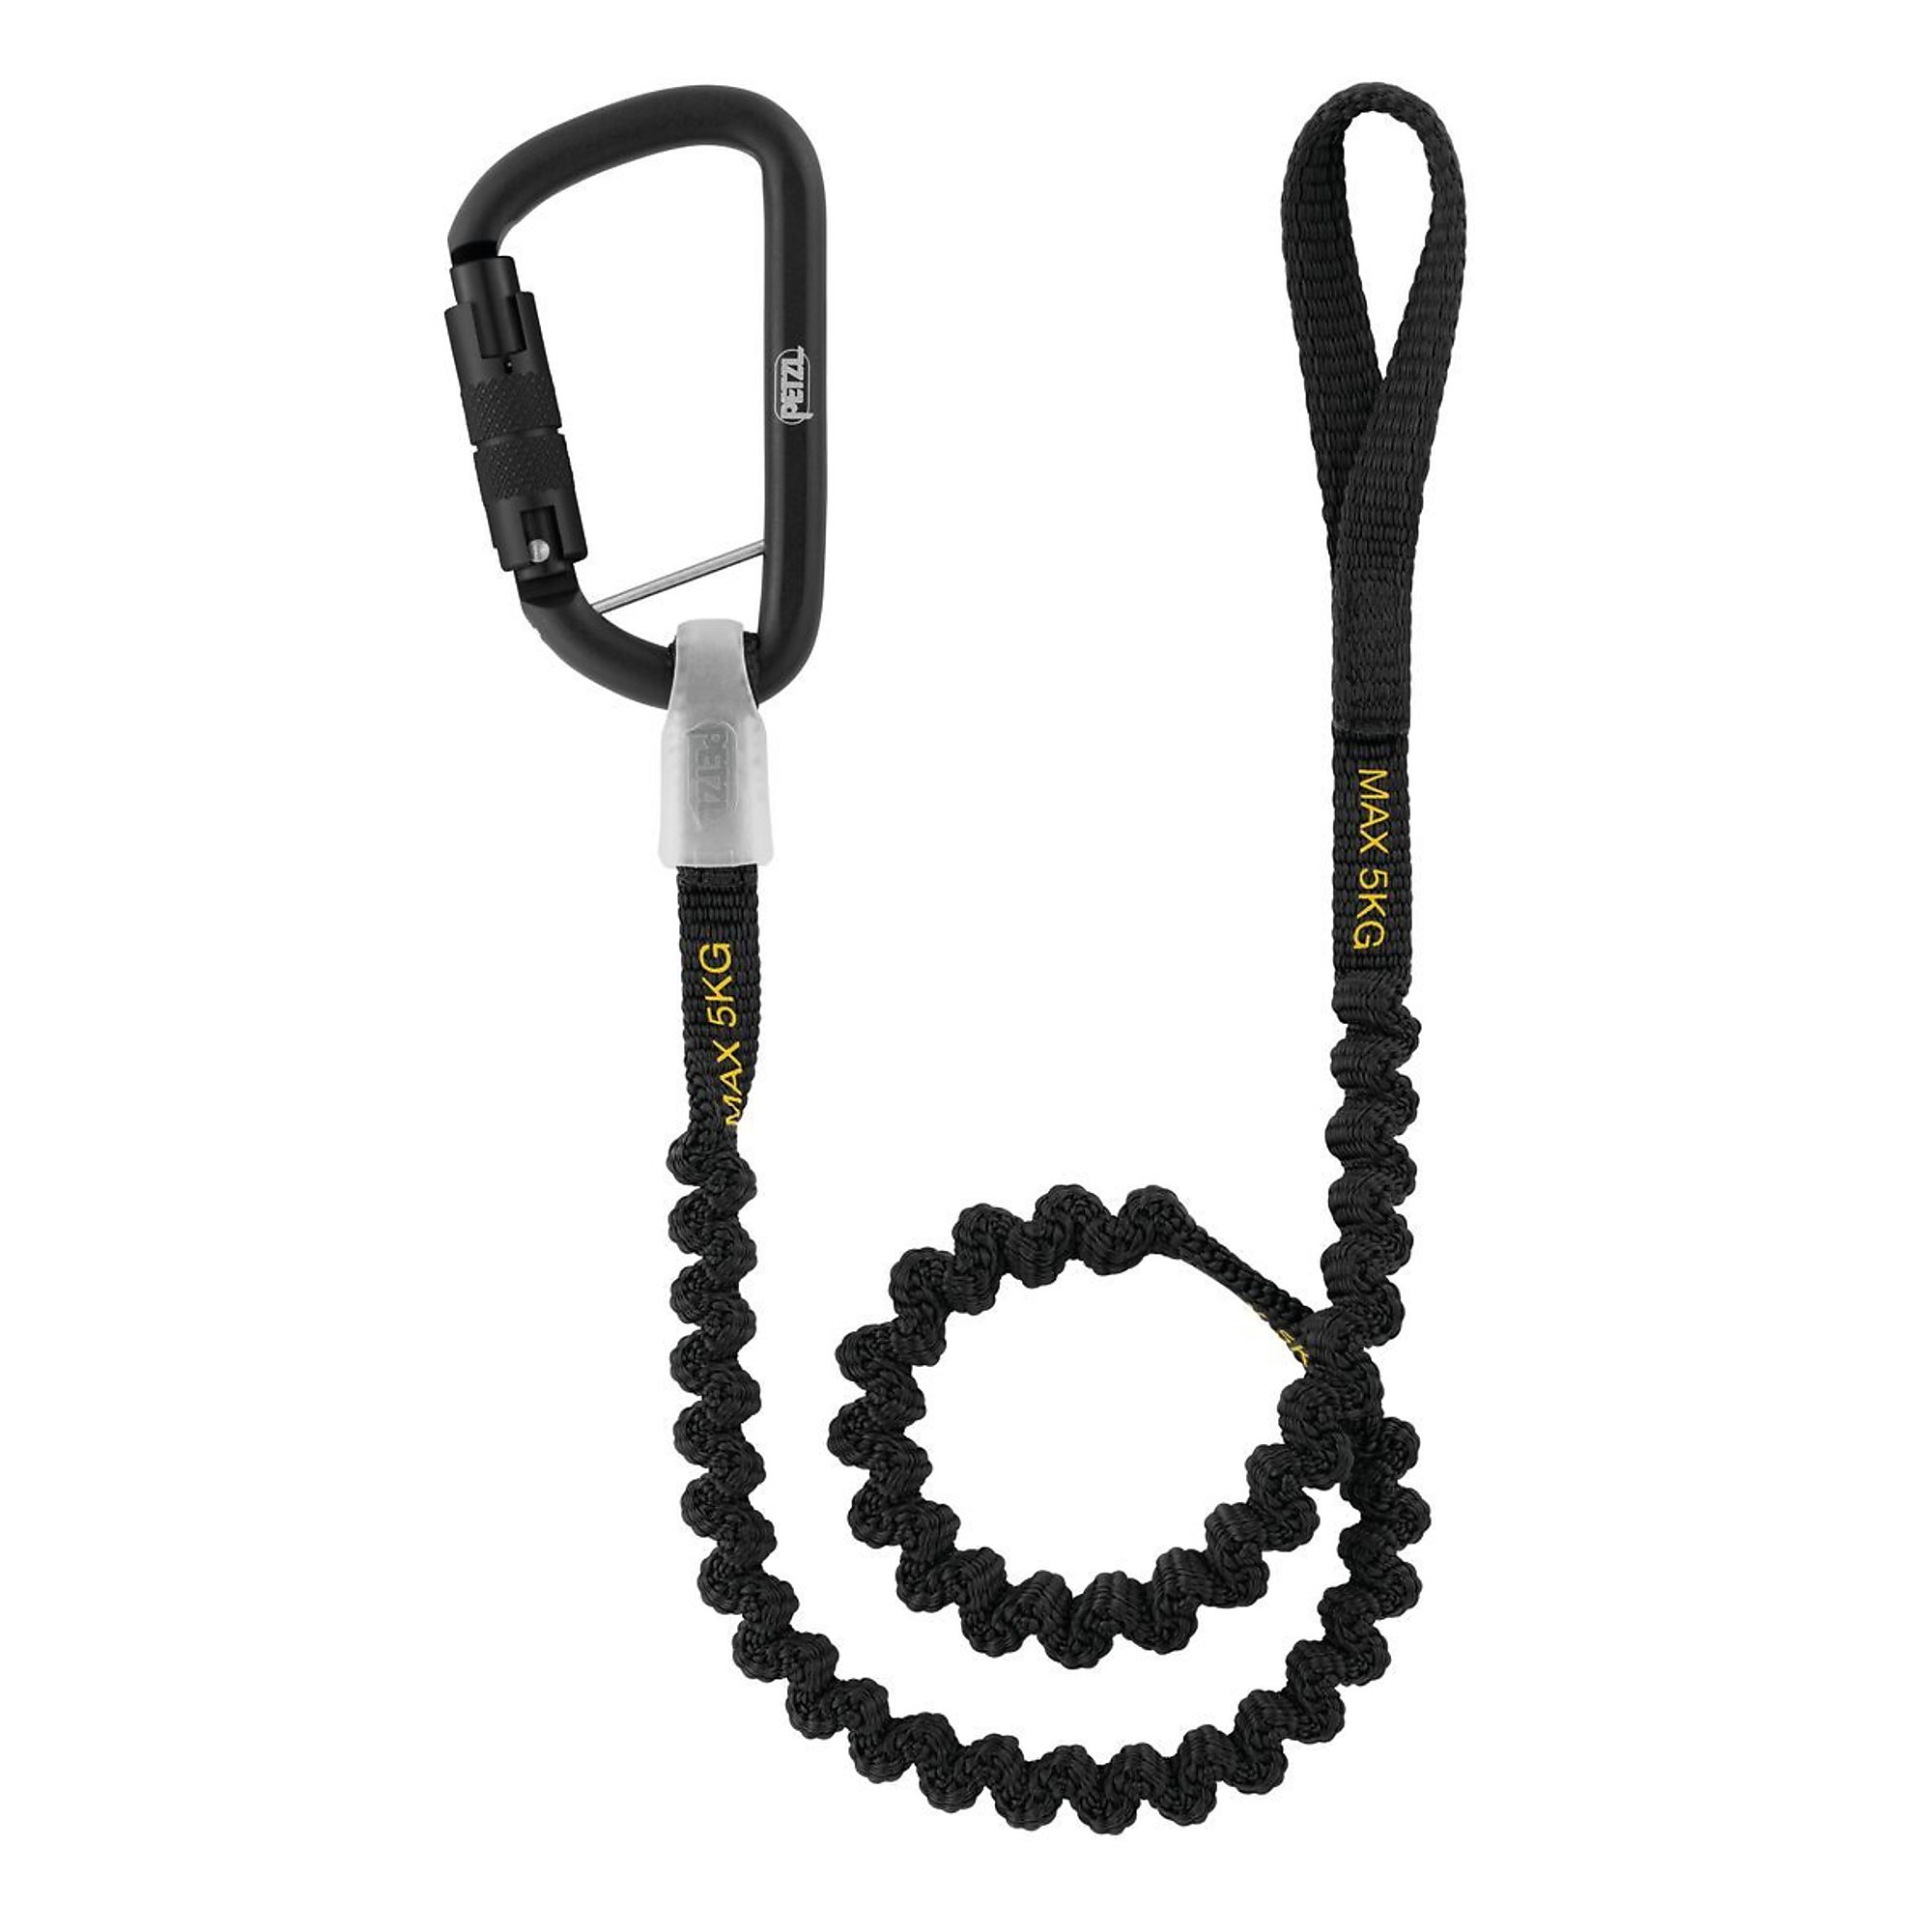 Petzl, TOOLEASH Extendable drop-prevention tool tether, Model S049AA00